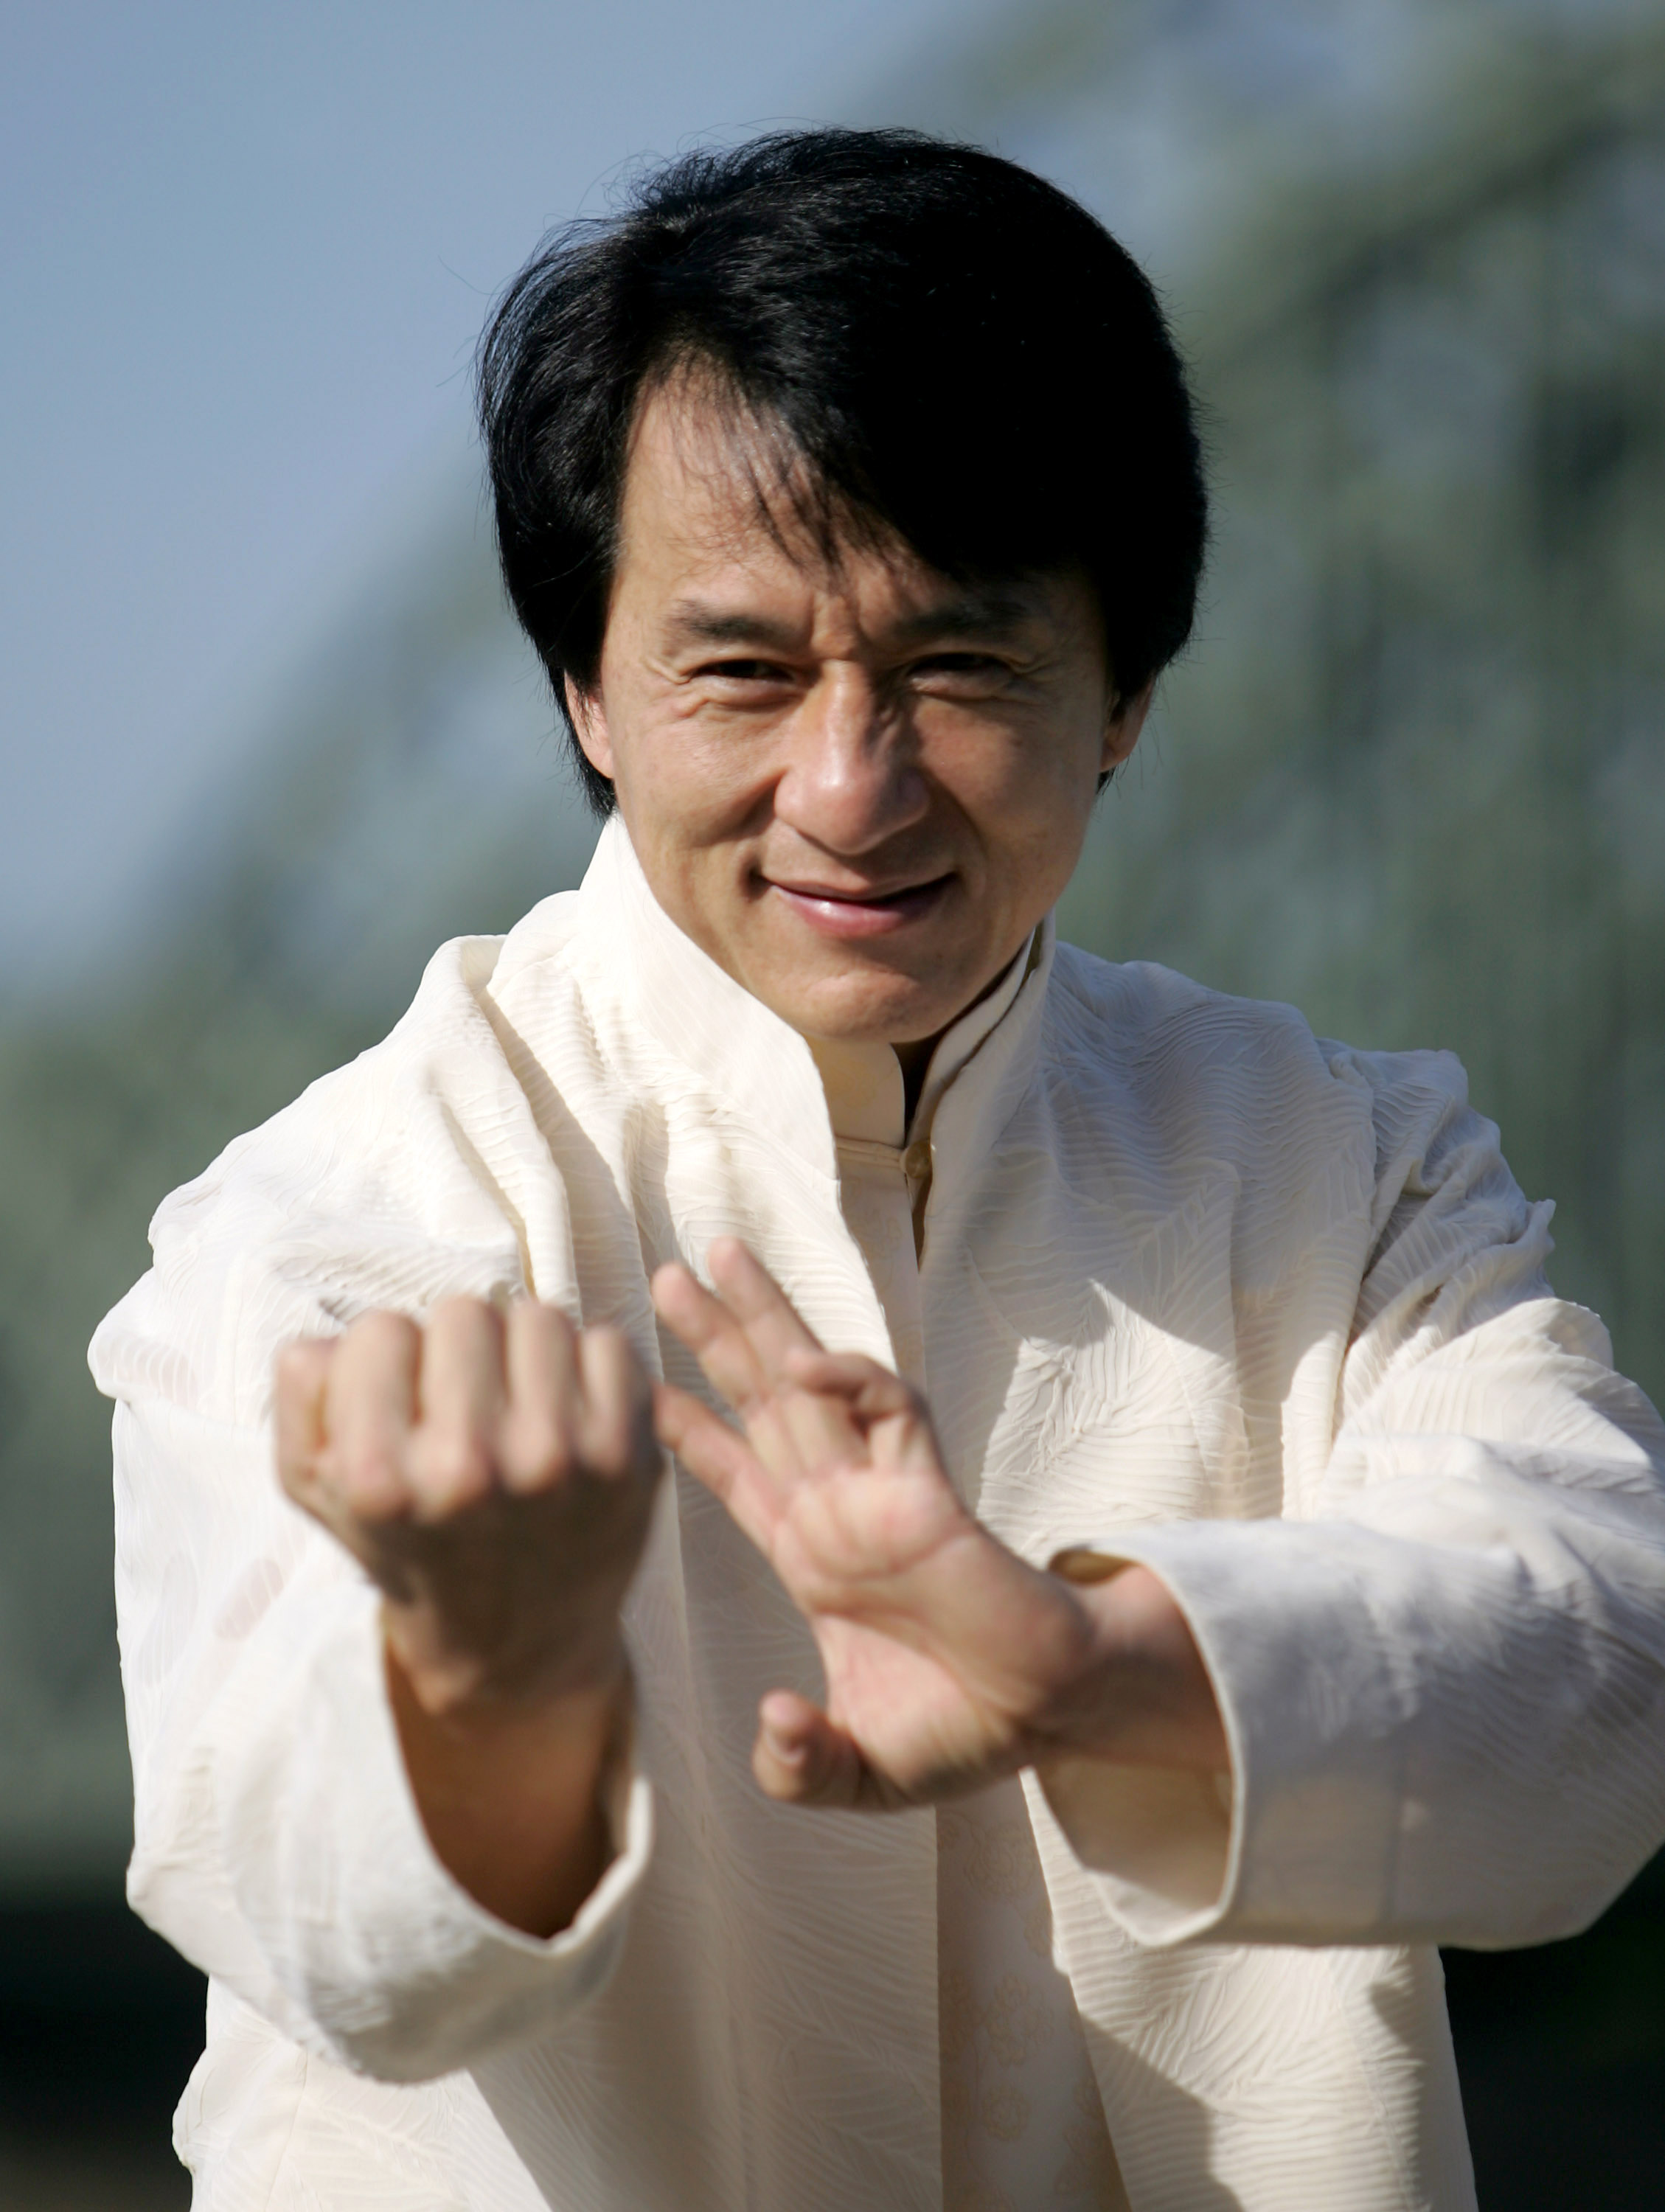 Jackie Chan posing for a picture ahead of the premiere of "New Police Story" in Cologne, Germany on October 10, 2005 | Source: Getty Images